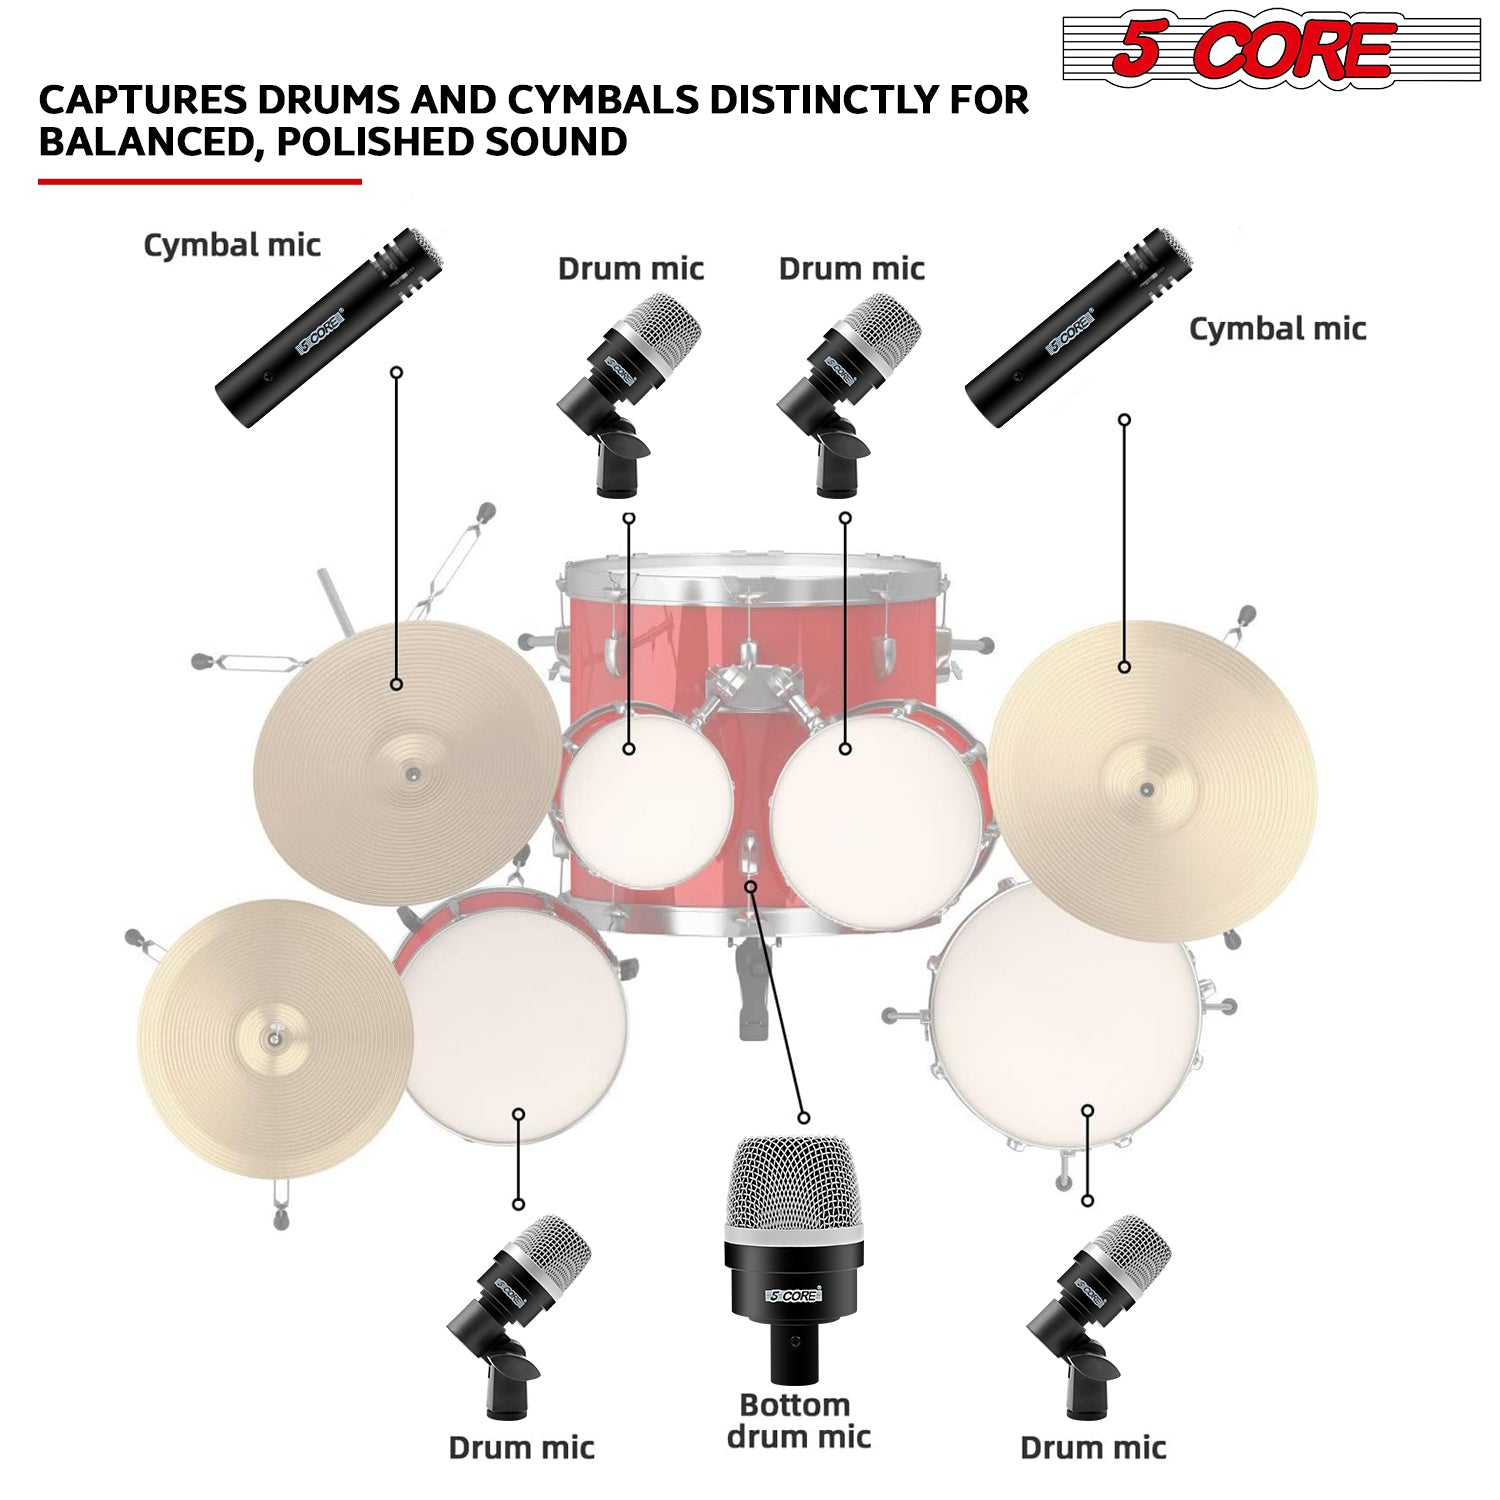 Professional drum microphone set for capturing every nuance of drum performance.